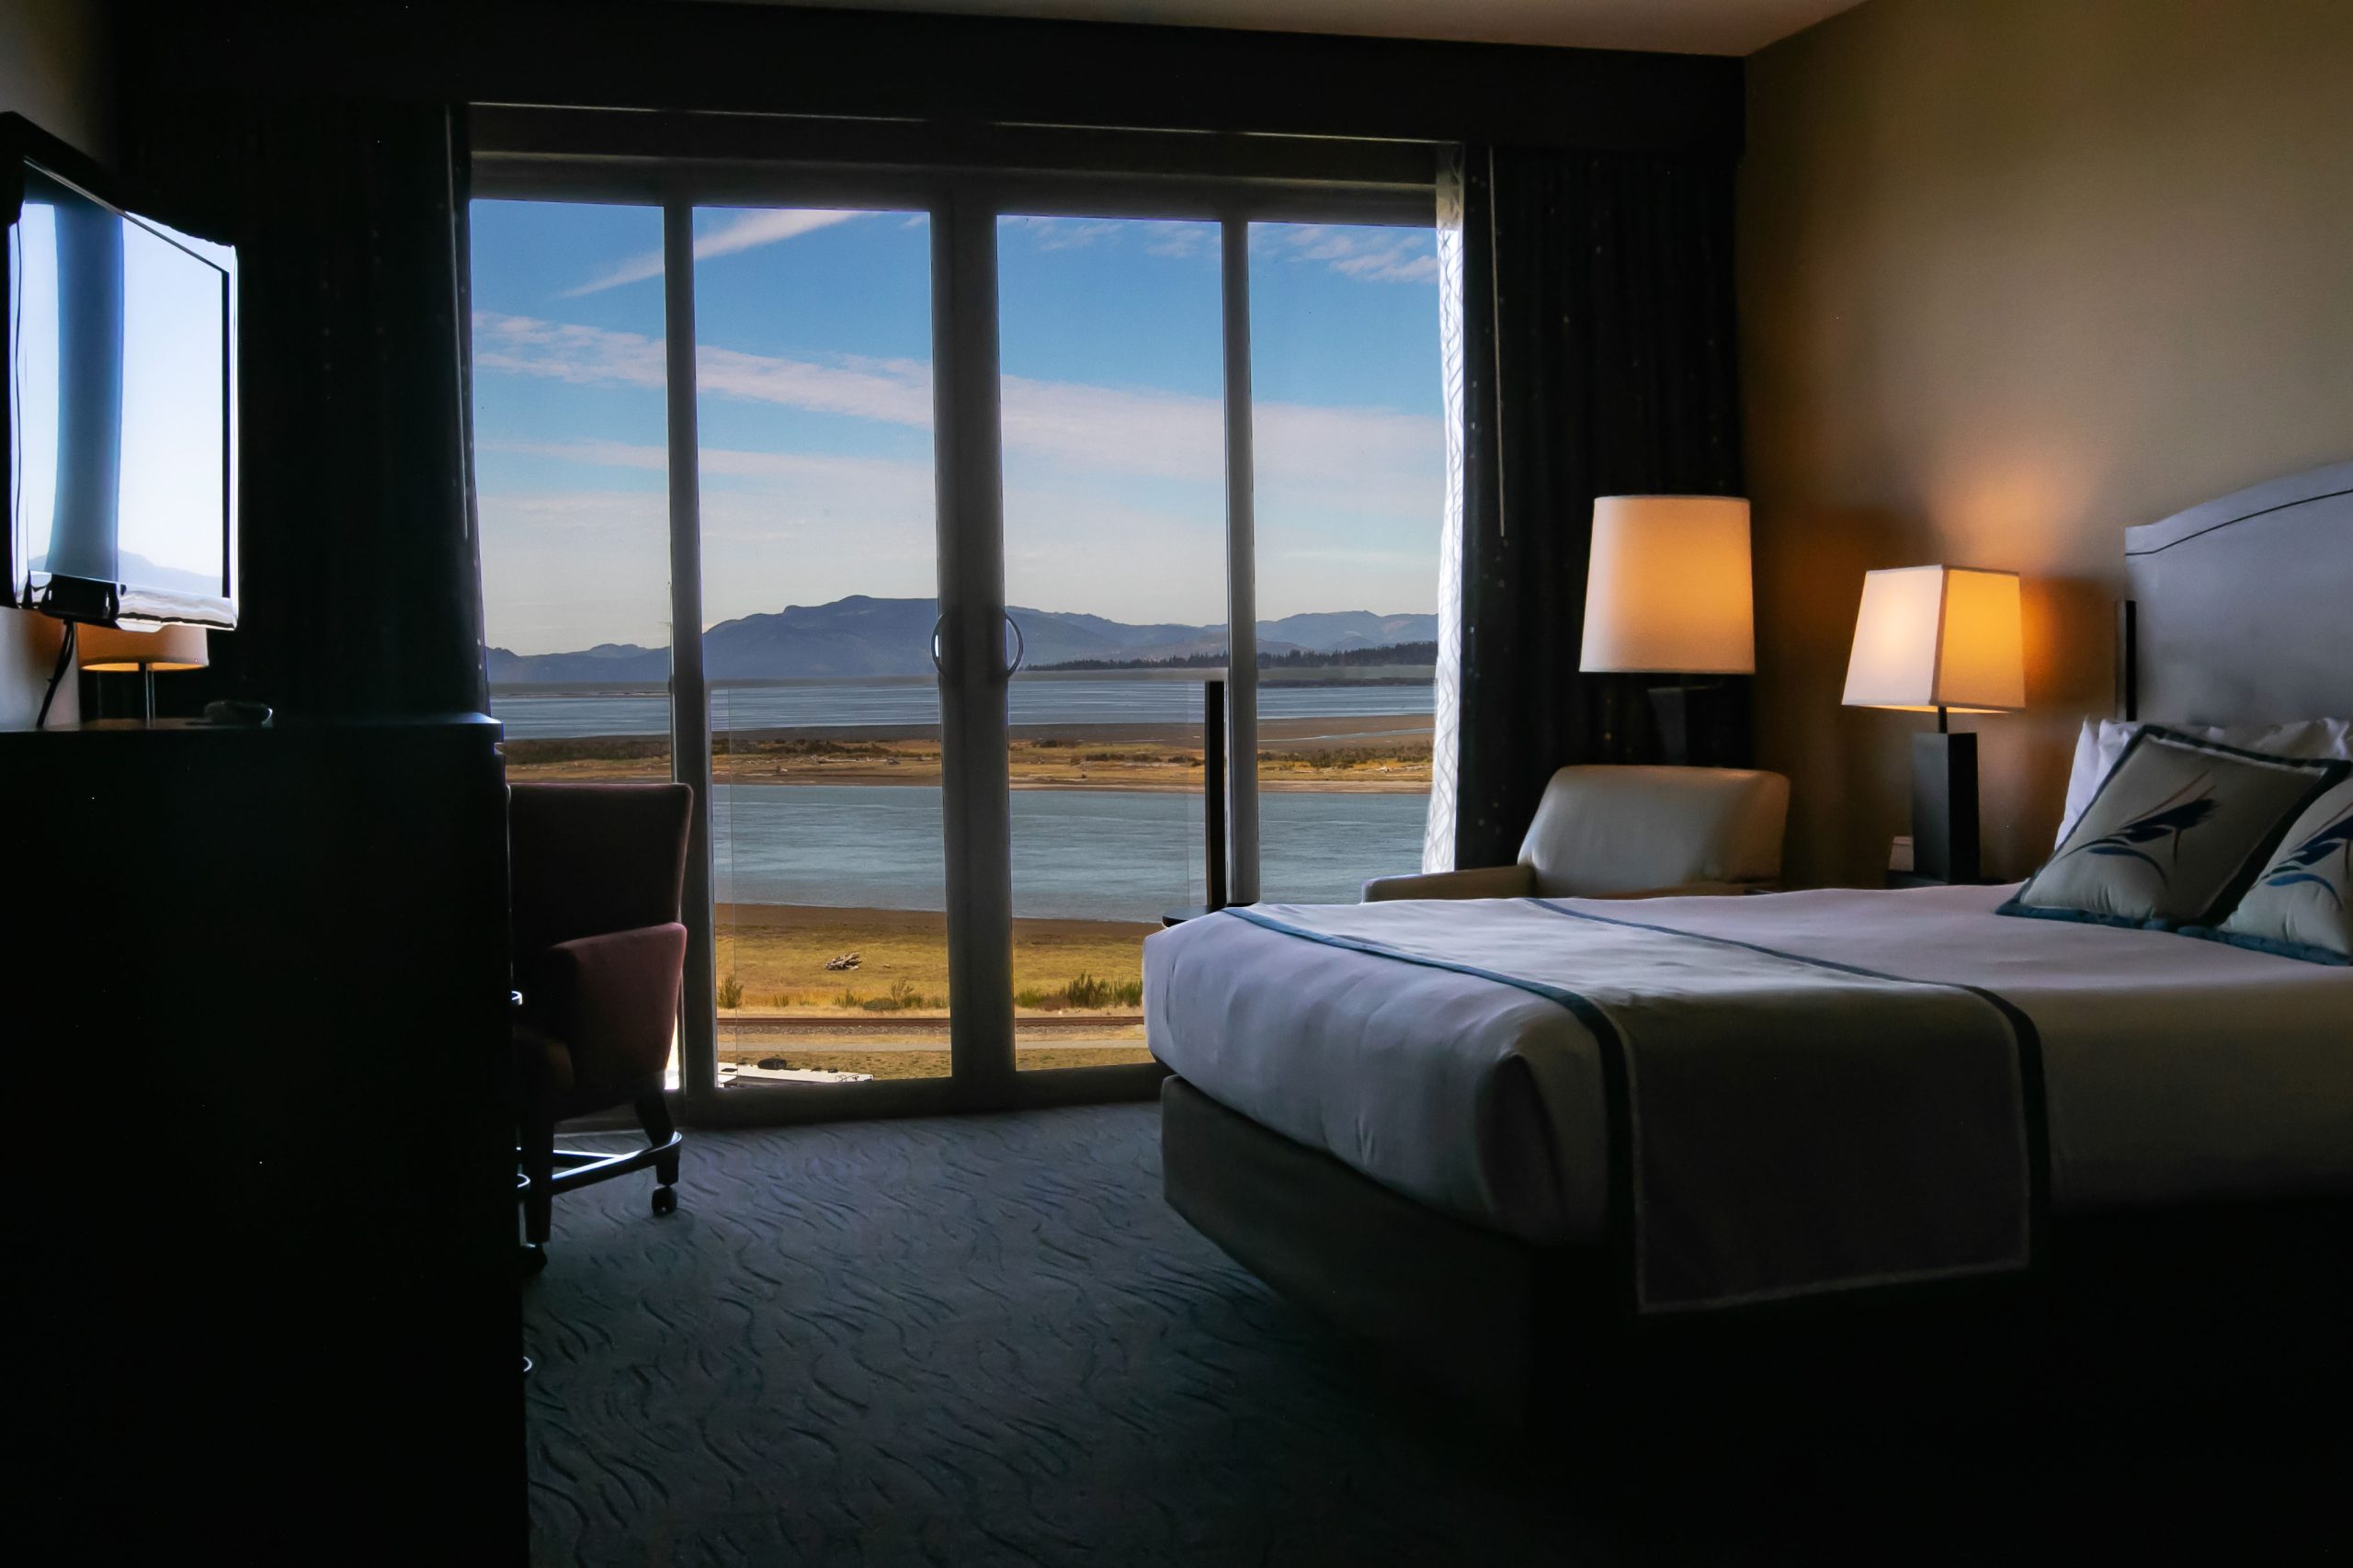 Bay View room with a king size bed, chair, and window view